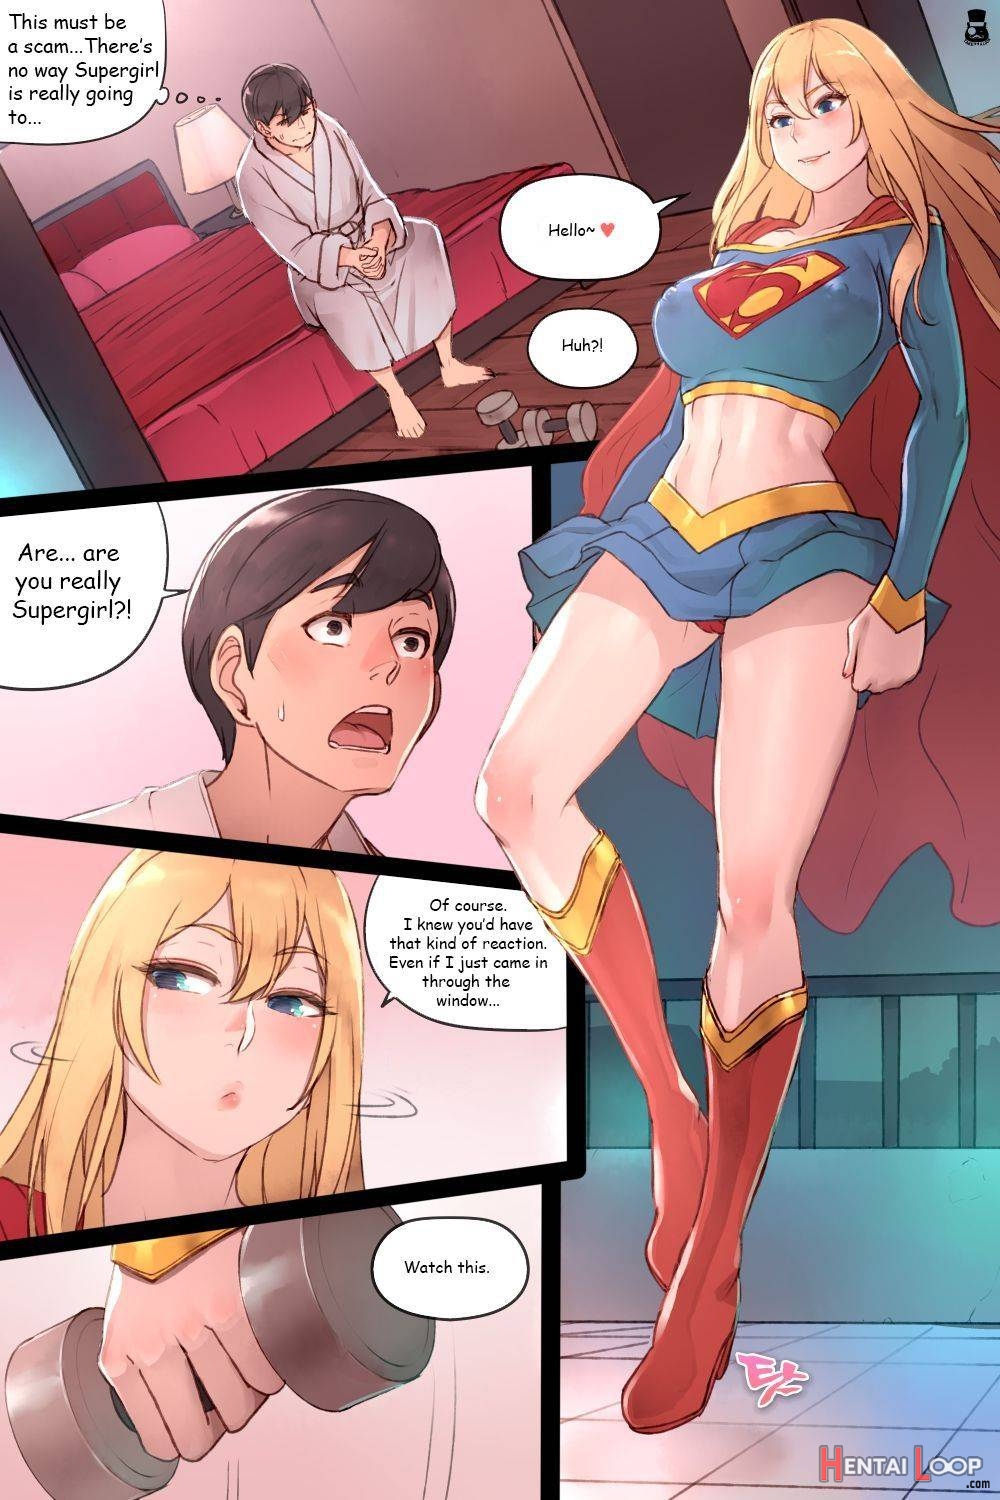 Page 1 of Supergirl's Secret Service (by Mr.takealook) - Hentai doujinshi  for free at HentaiLoop